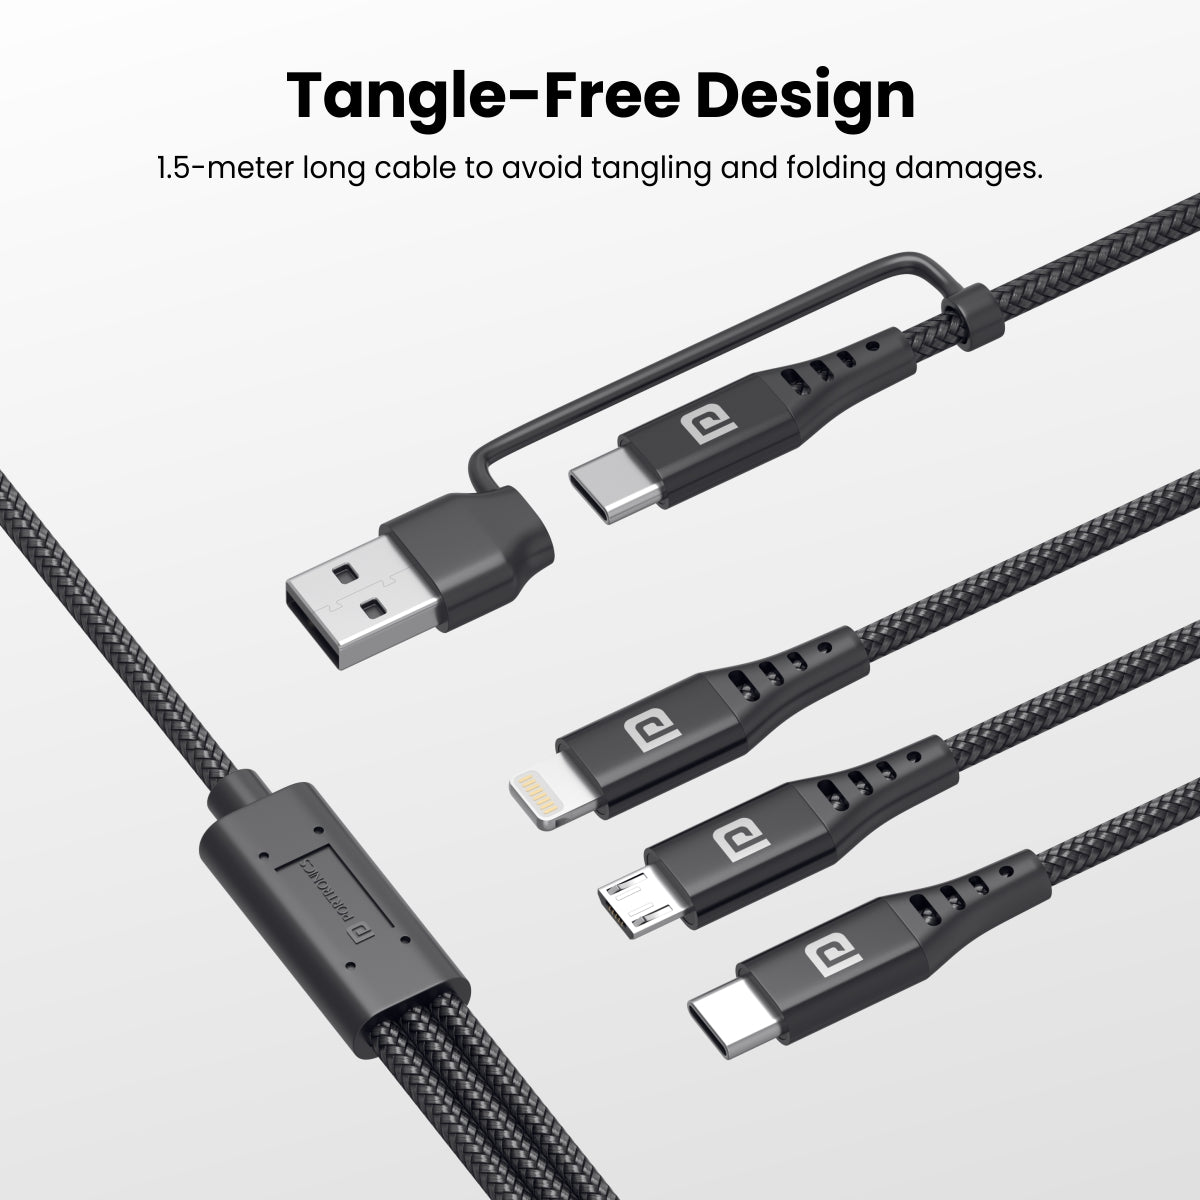 Black Portronics Konnect J9 3-in-1 USB cable has Type-C, Micro USB and 8-pin tangle free design